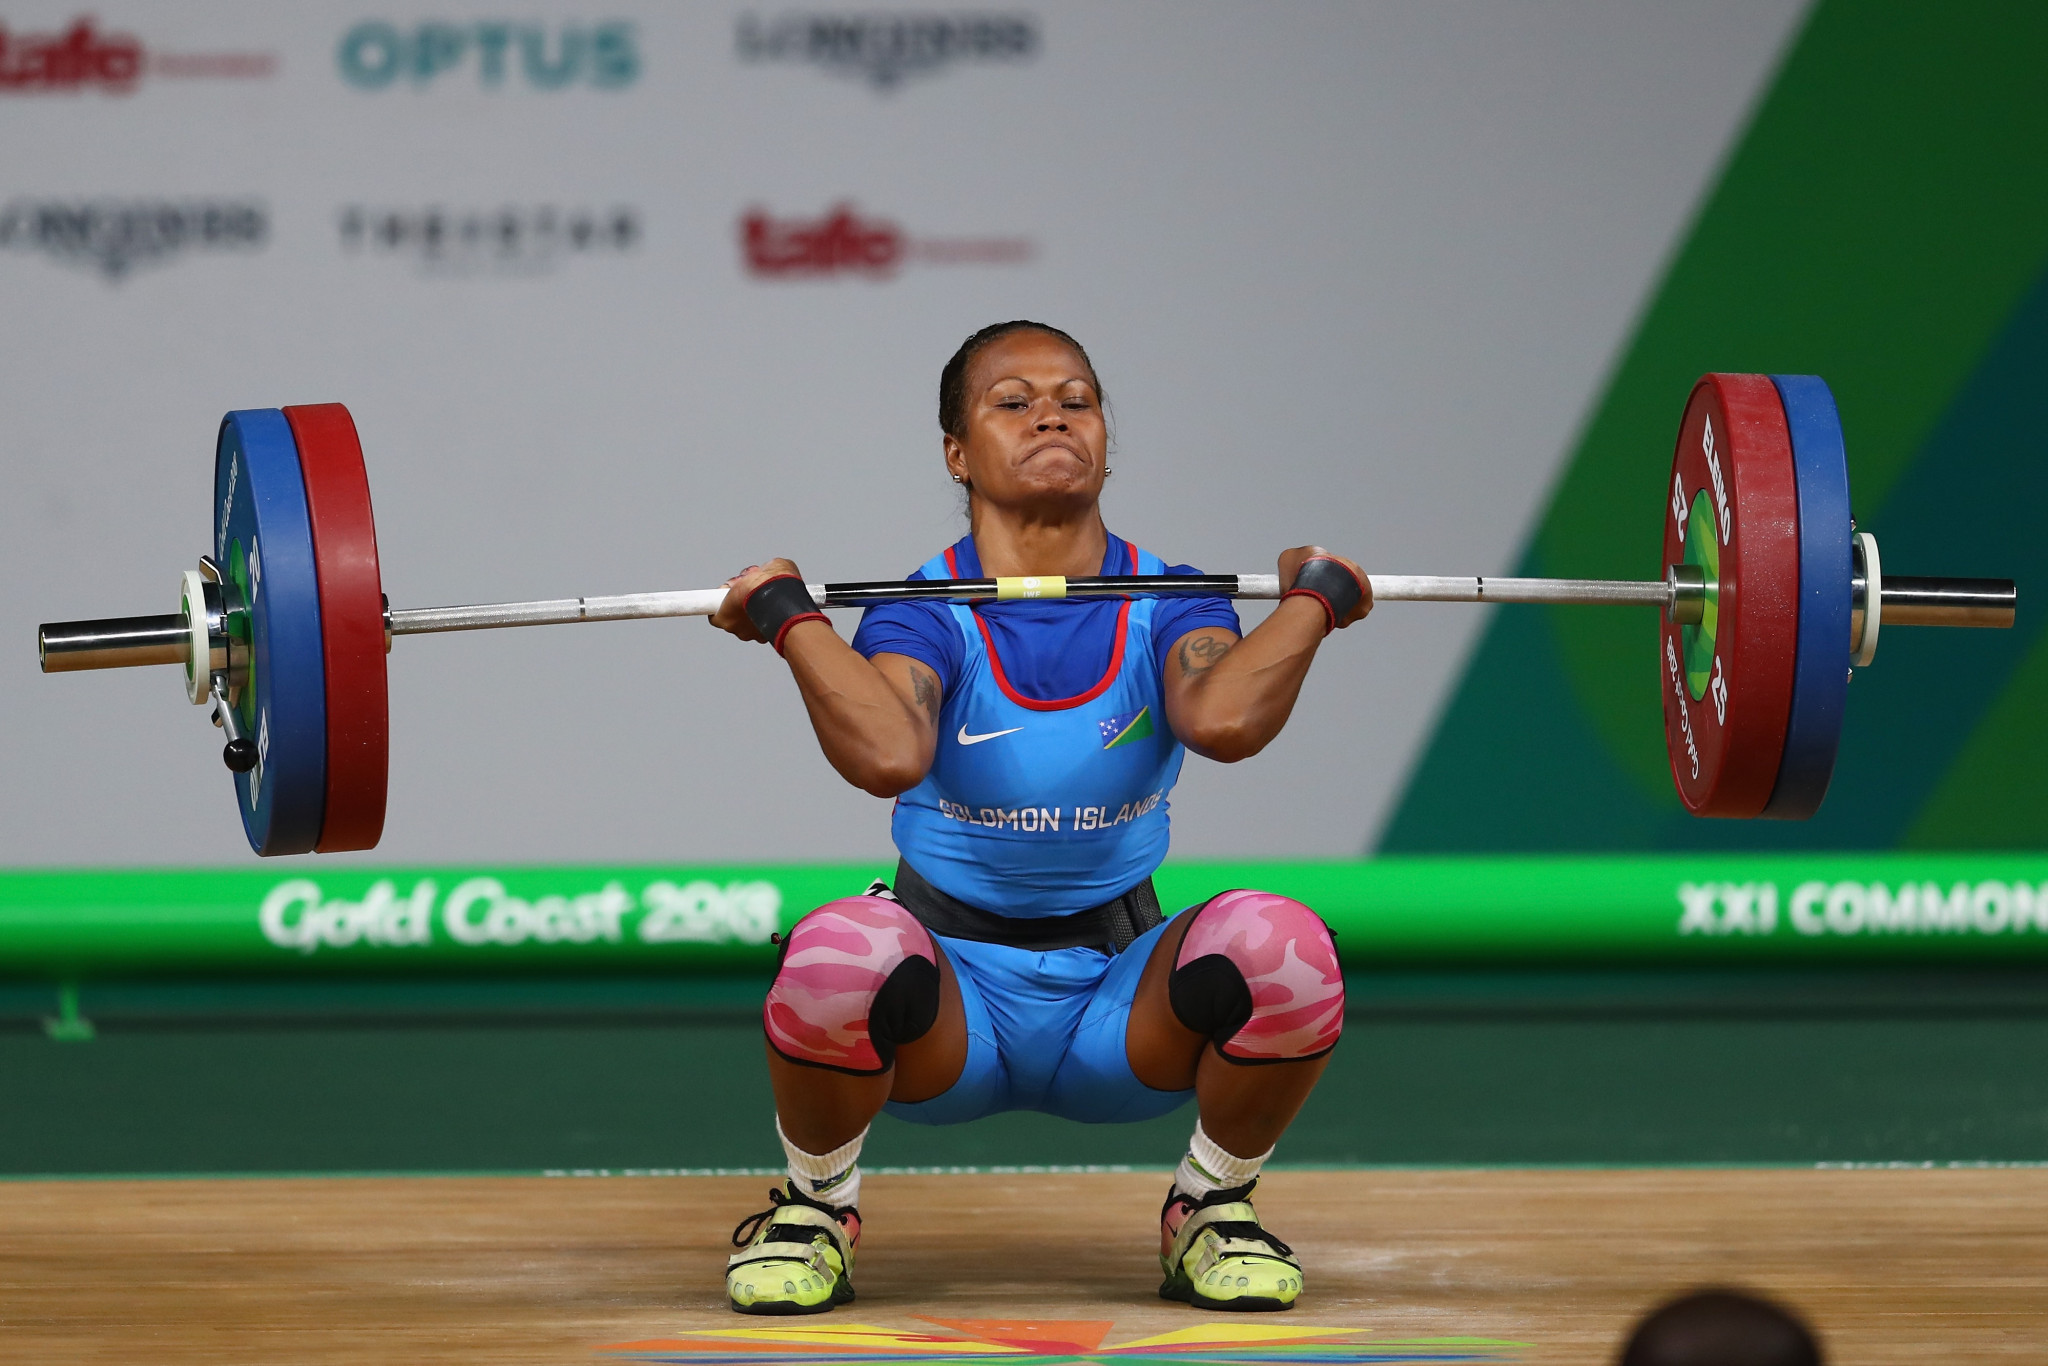 Weightlifter Jenly Tegu Wini claimed bronze at the Gold Coast 2018 Commonwealth Games ©Getty Images